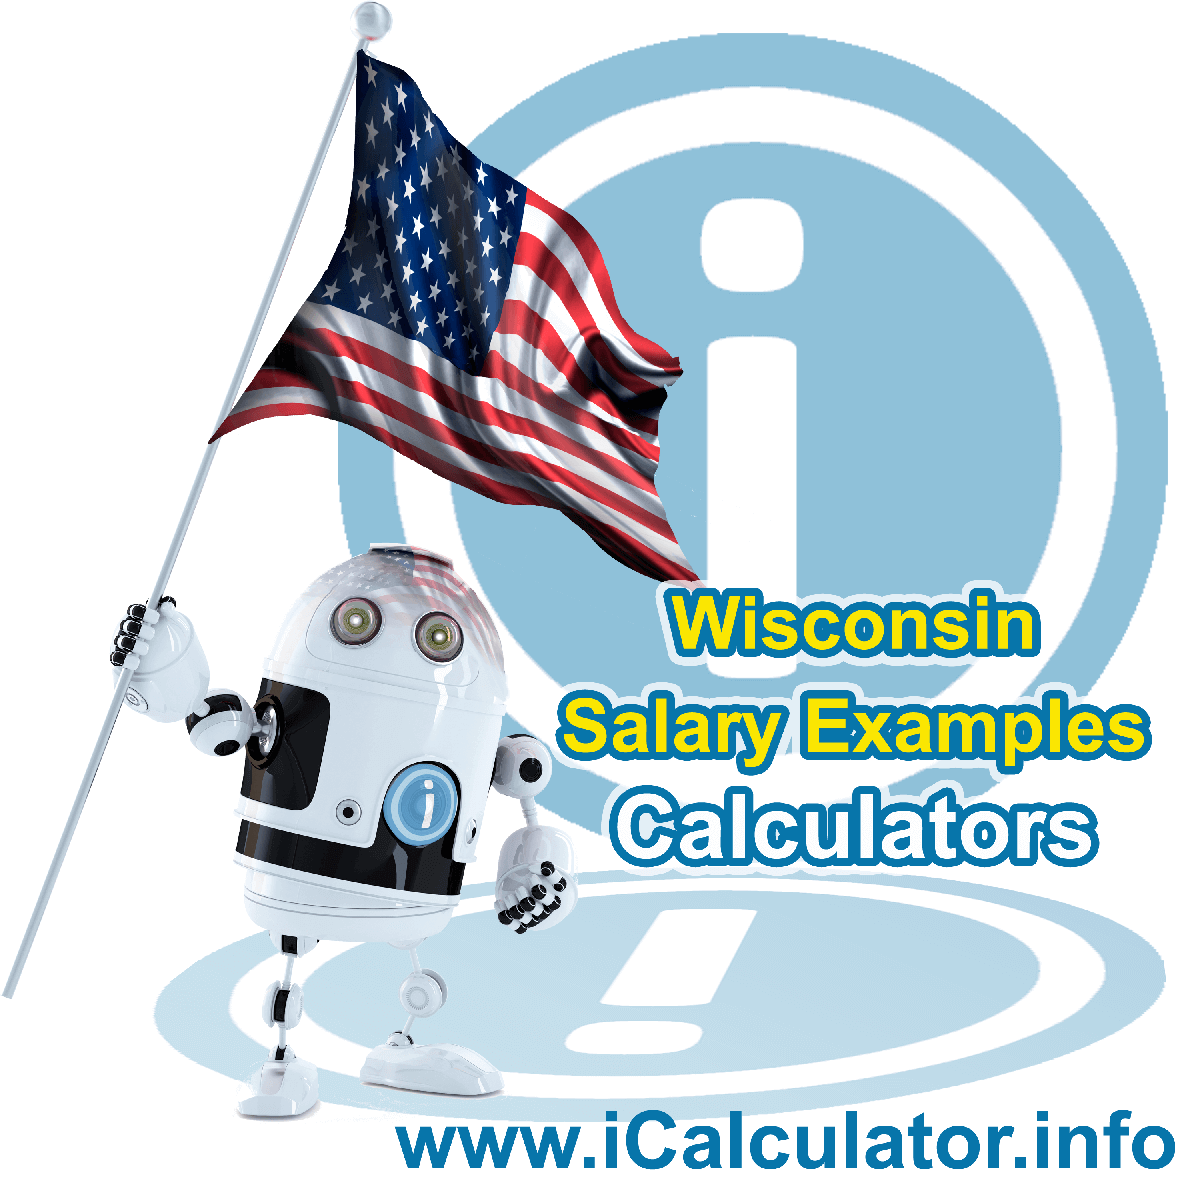 Wisconsin Salary Example for $ 20,000.00 in 2023 | iCalculator™ | $ 20,000.00 salary example for employee and employer paying Wisconsin State tincome taxes. Detailed salary after tax calculation including Wisconsin State Tax, Federal State Tax, Medicare Deductions, Social Security, Capital Gains and other income tax and salary deductions complete with supporting Wisconsin state tax tables 